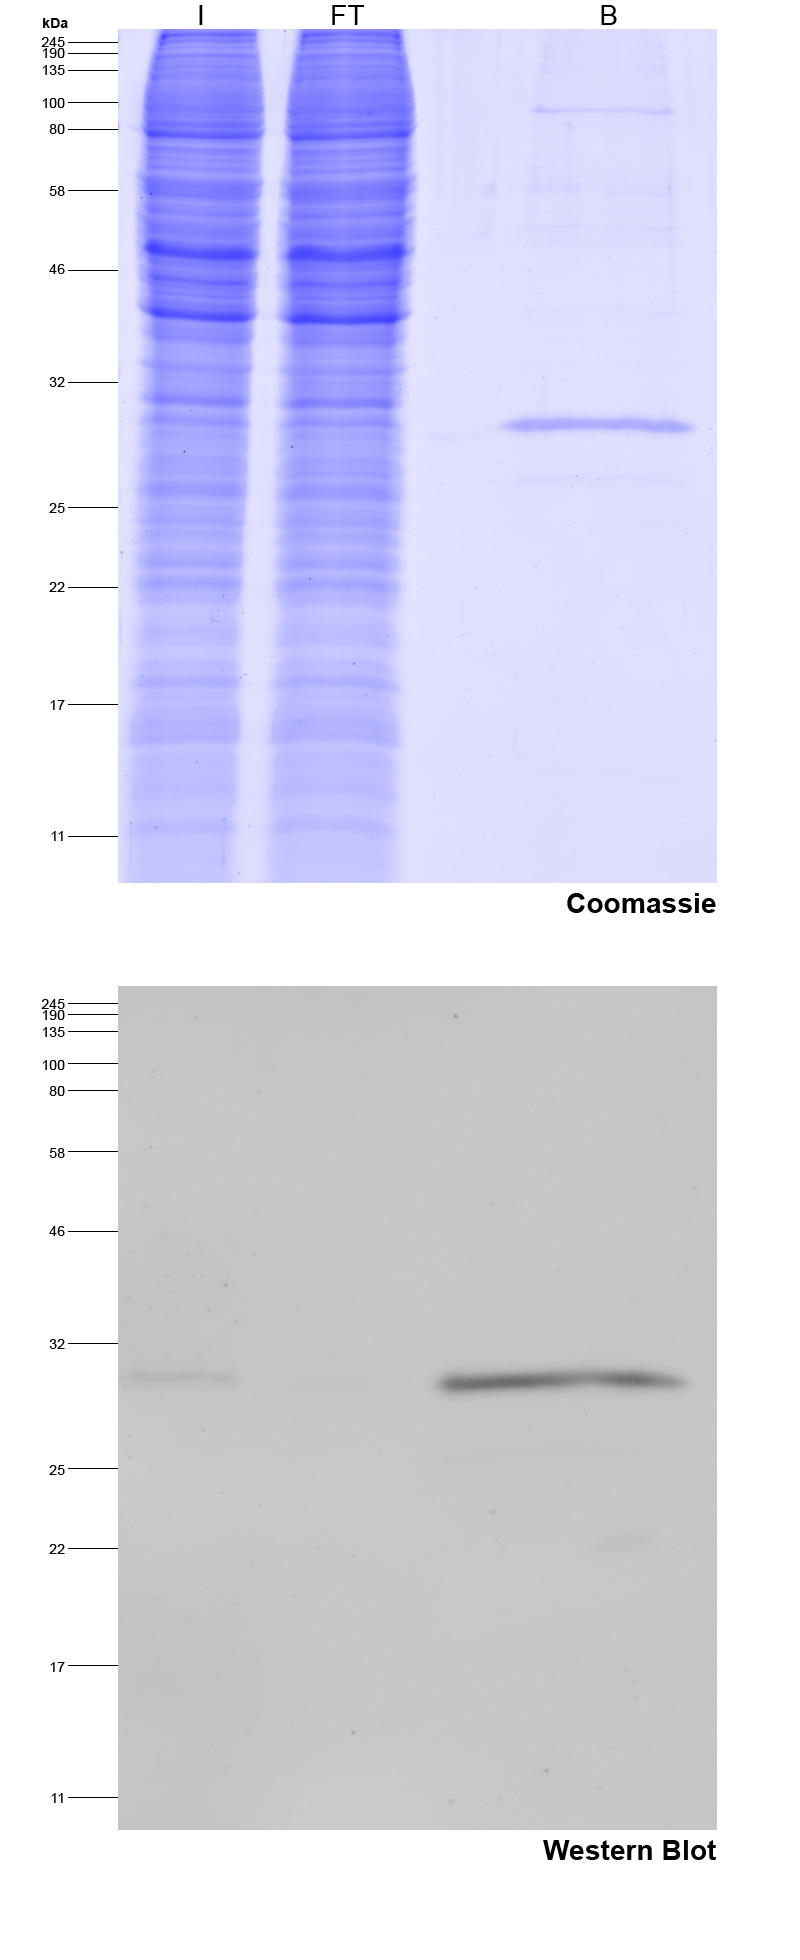 Spot-Trap Magnetic Agarose for immunoprecipitation of Spot-tagged proteins: Coomassie blue stained gel and Western blot I: Input, FT: Flow-Through, B: Bound